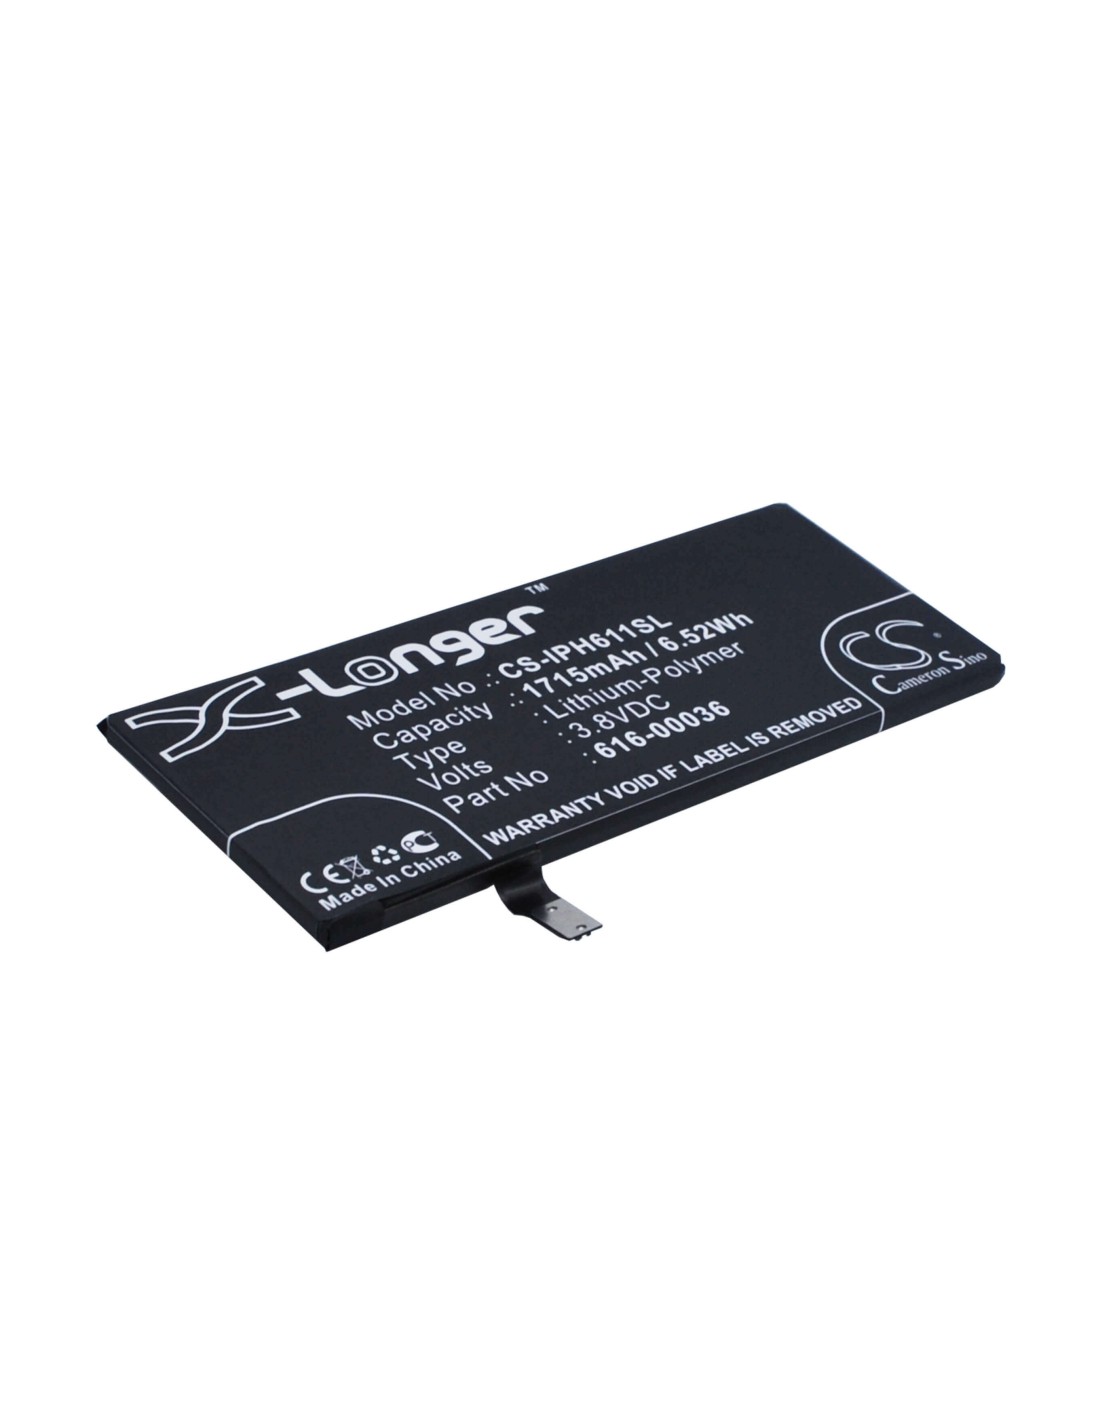 Battery for Apple iPhone 6s, A1691, A1633 3.8V, 1715mAh - 6.52Wh